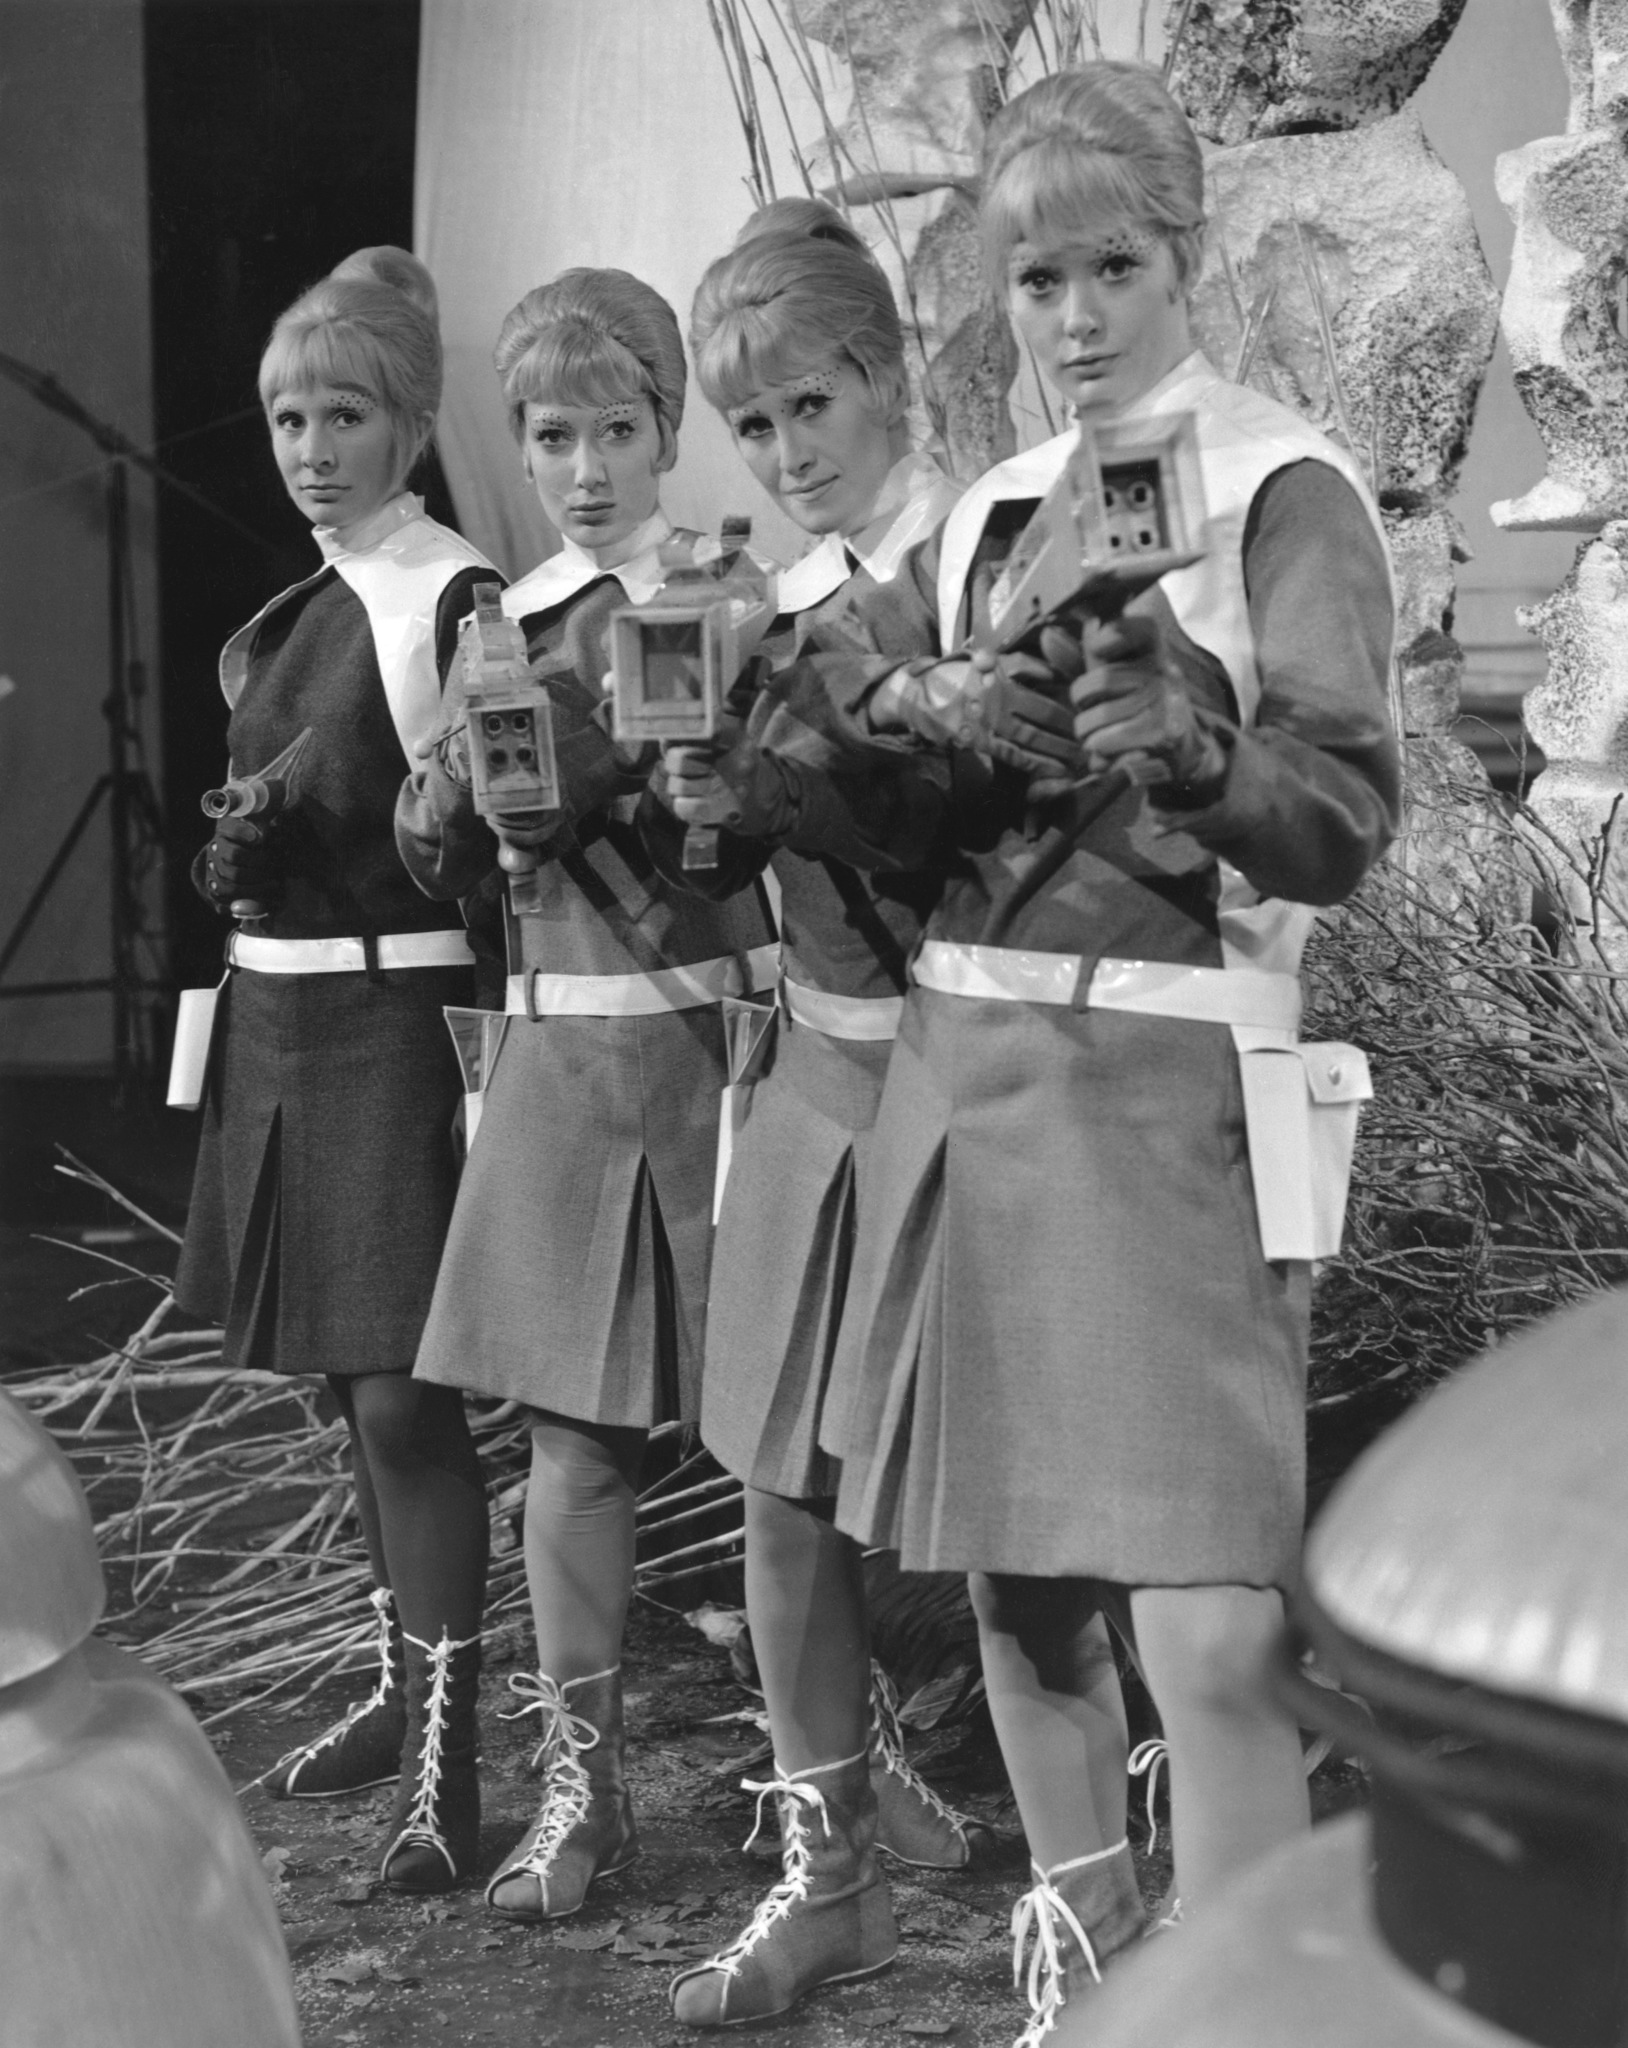 A group of actresses playing 'Drahvins' in 'Galaxy 4', a four-part serial of the popular British television sci-fi series 'Doctor Who', 24th June 1965. The Drahvins are a humanoid alien race dominated by the females of the species. Stephanie Bidmead (1929 - 1974, left) plays the Drahvin leader Maaga, alongside Marina Martin, Susanna Caroll and Lyn Ashley.